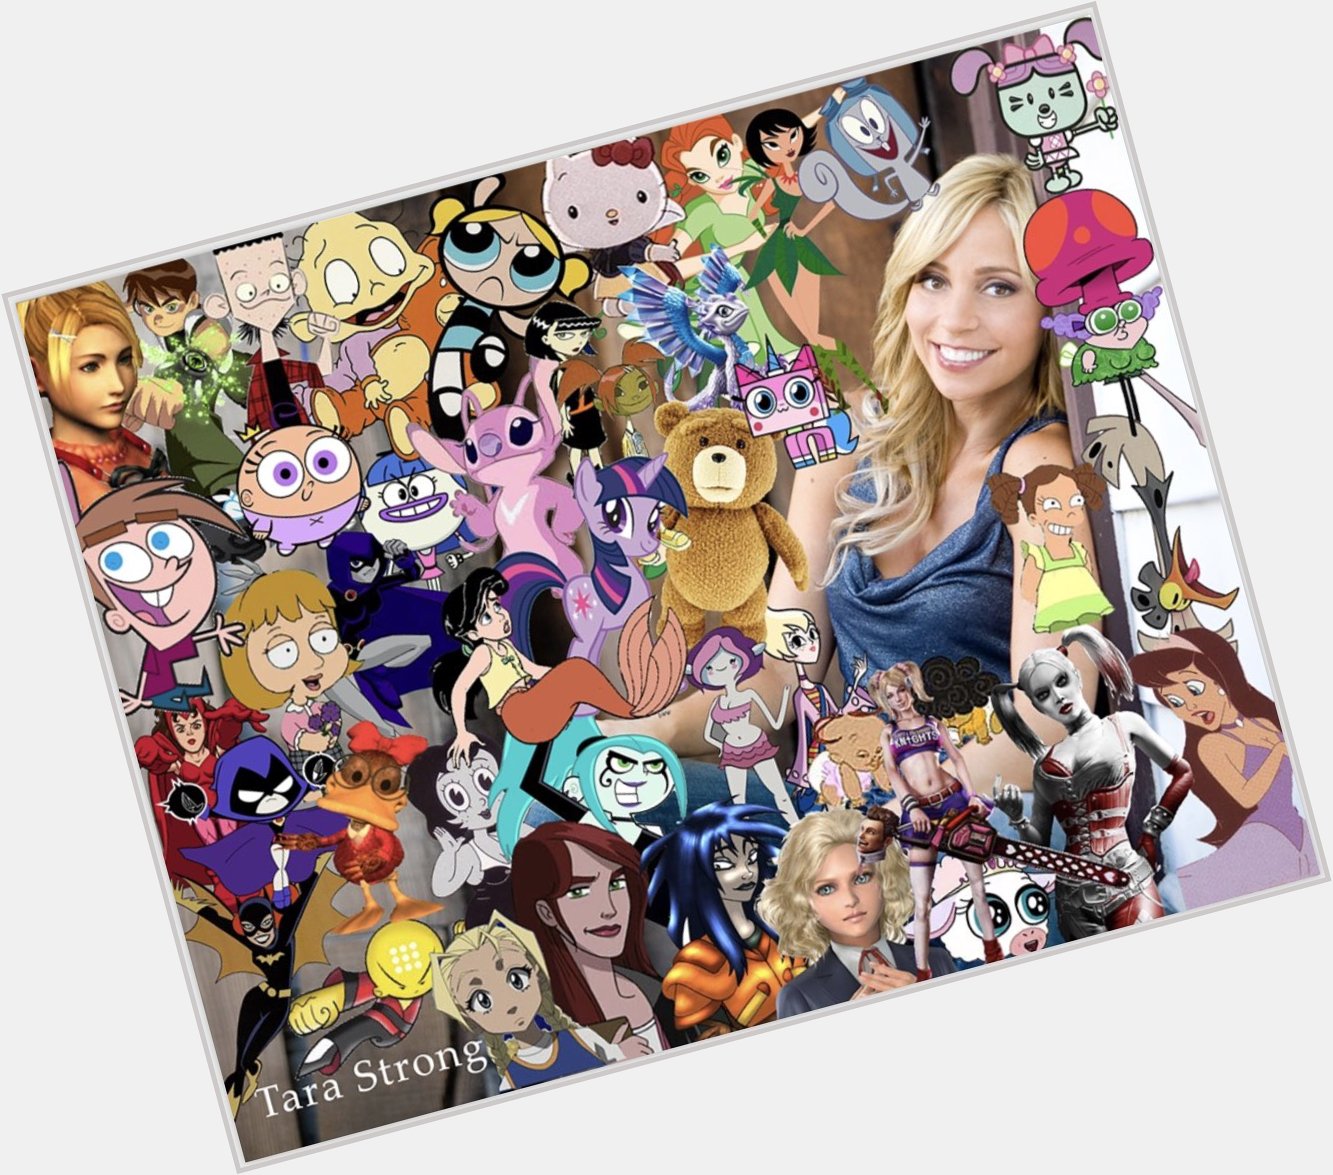 Happy Birthday to you, Tara Strong   . Greetings and send love from Vietnam   